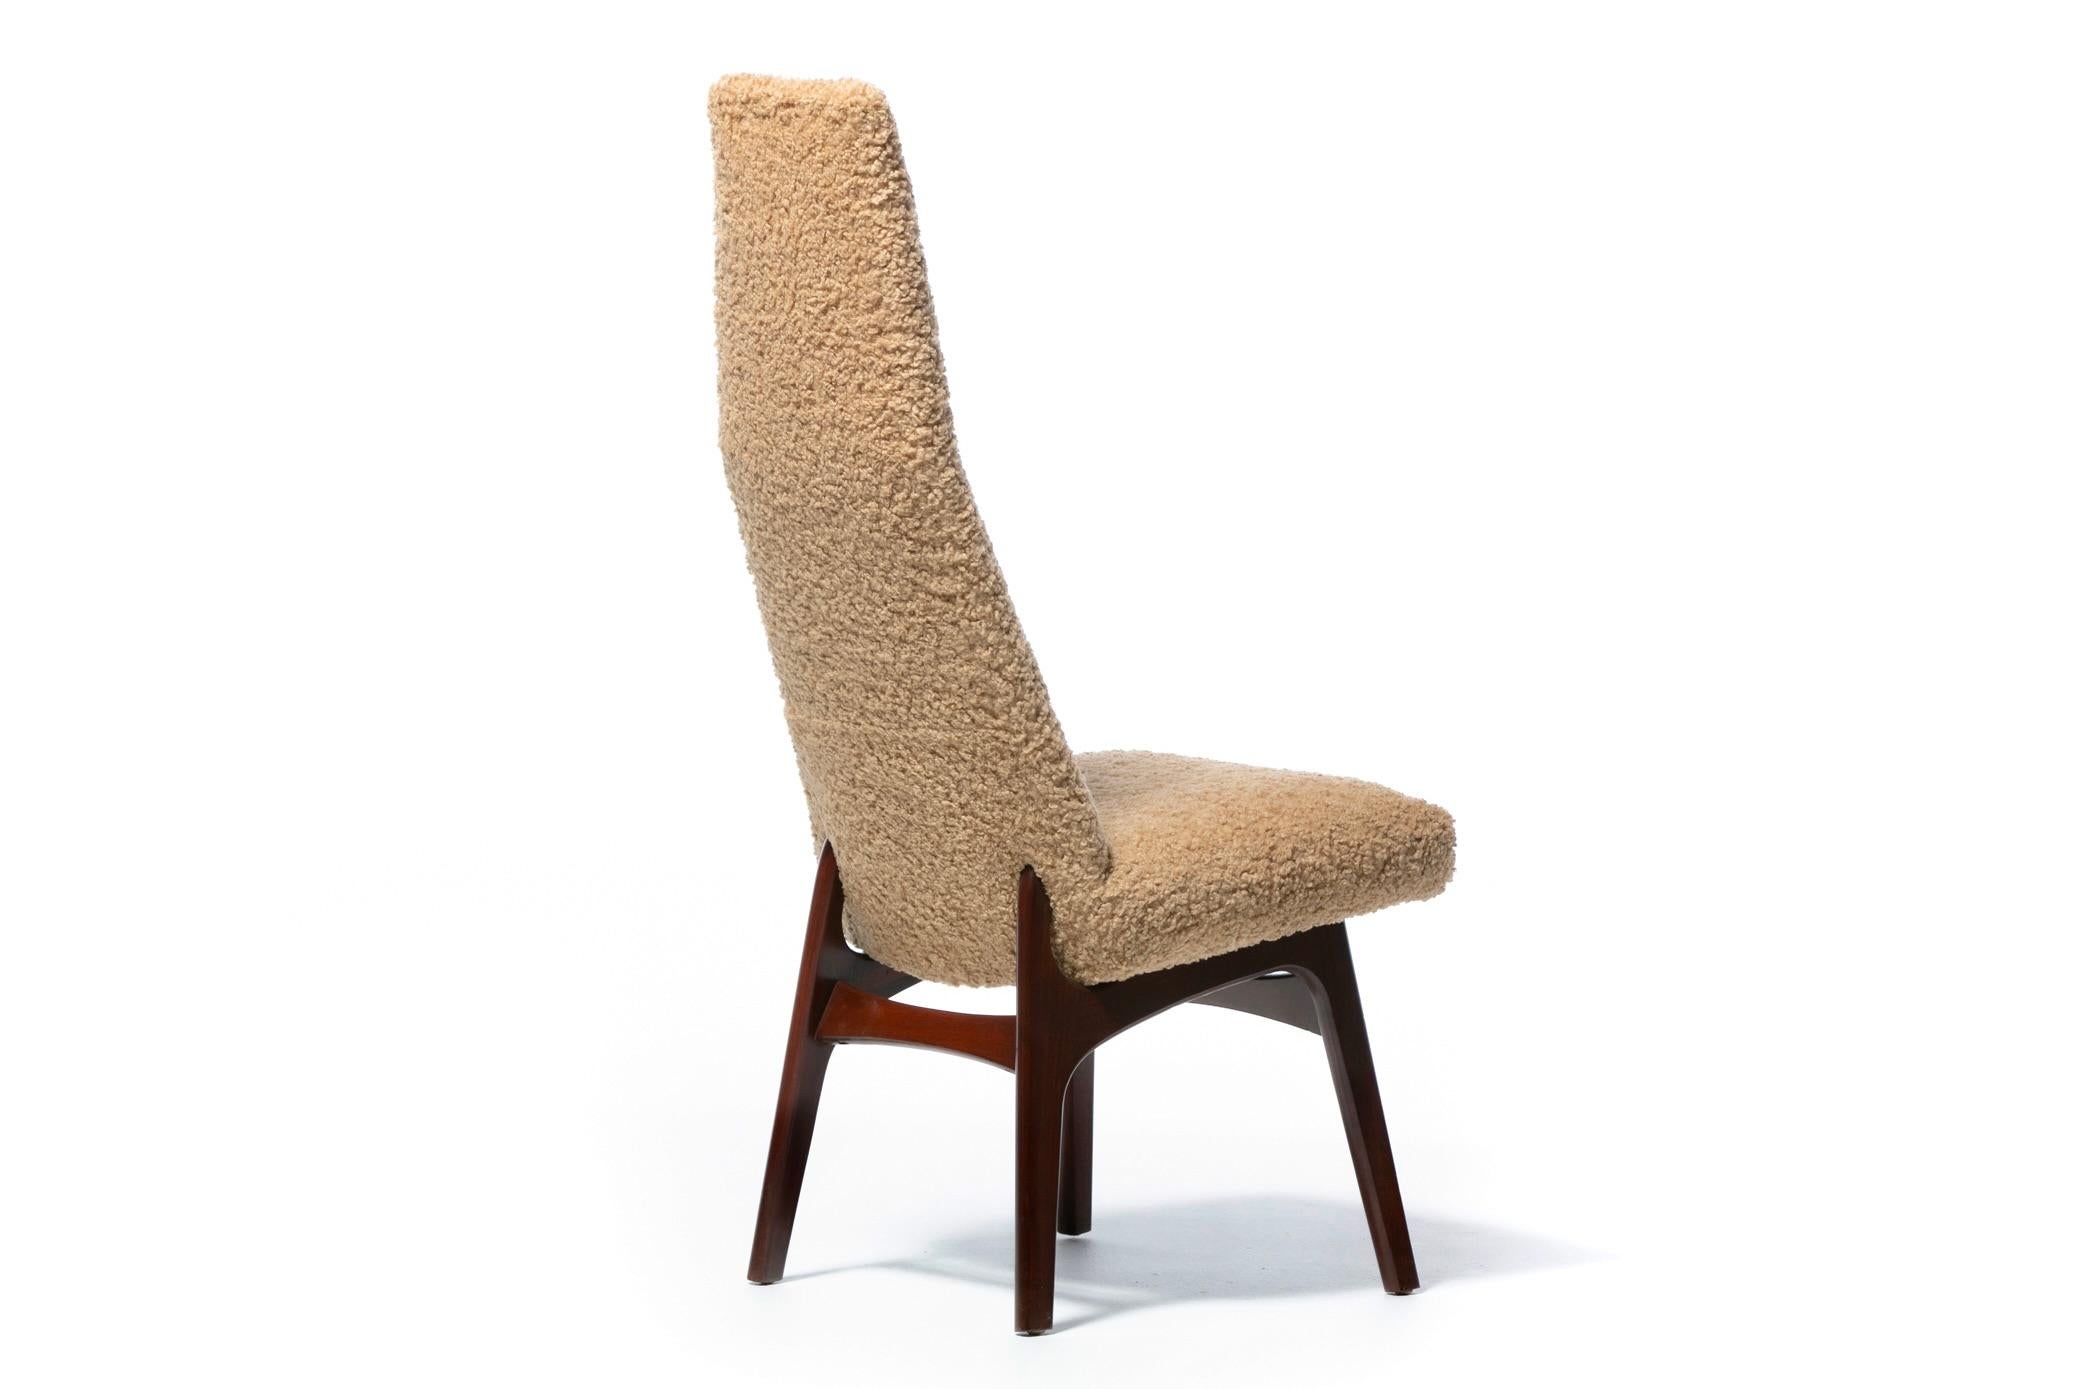 Set of 12 Adrian Pearsall Sculptural High Back Dining Chairs in Latte Bouclé For Sale 3